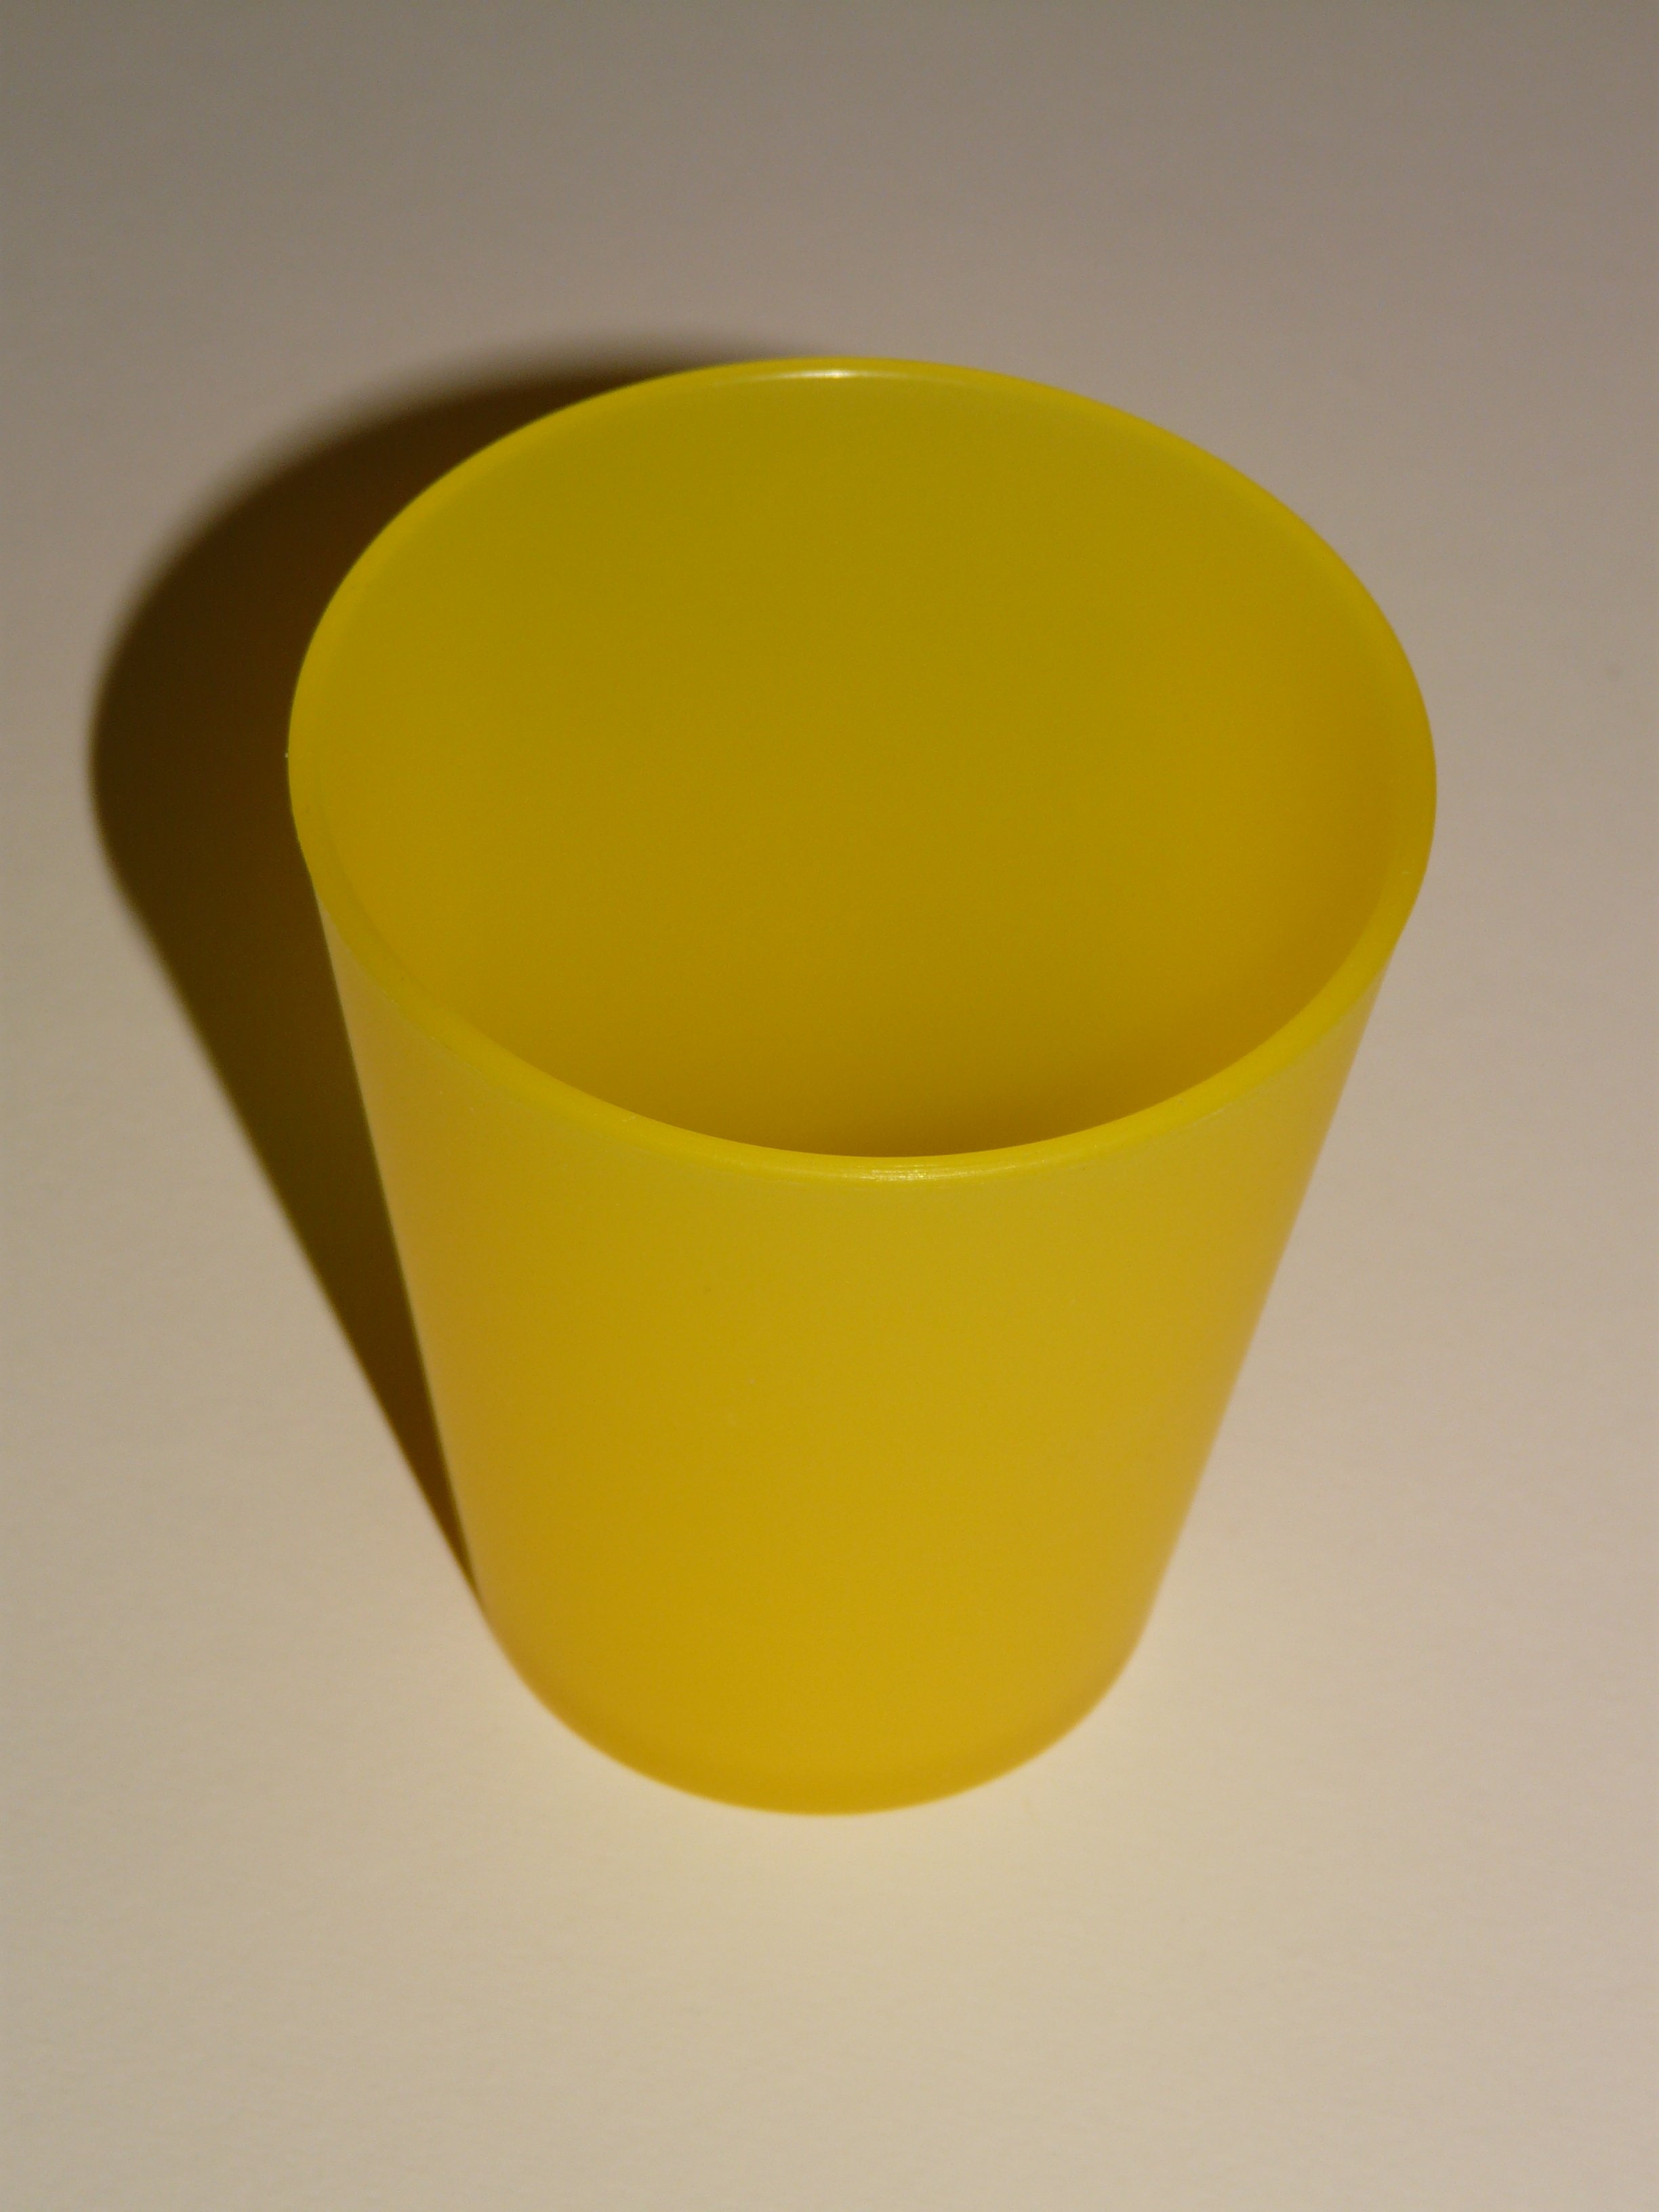 Download Yellow Plastic Cup Empty Free Image Peakpx Yellowimages Mockups